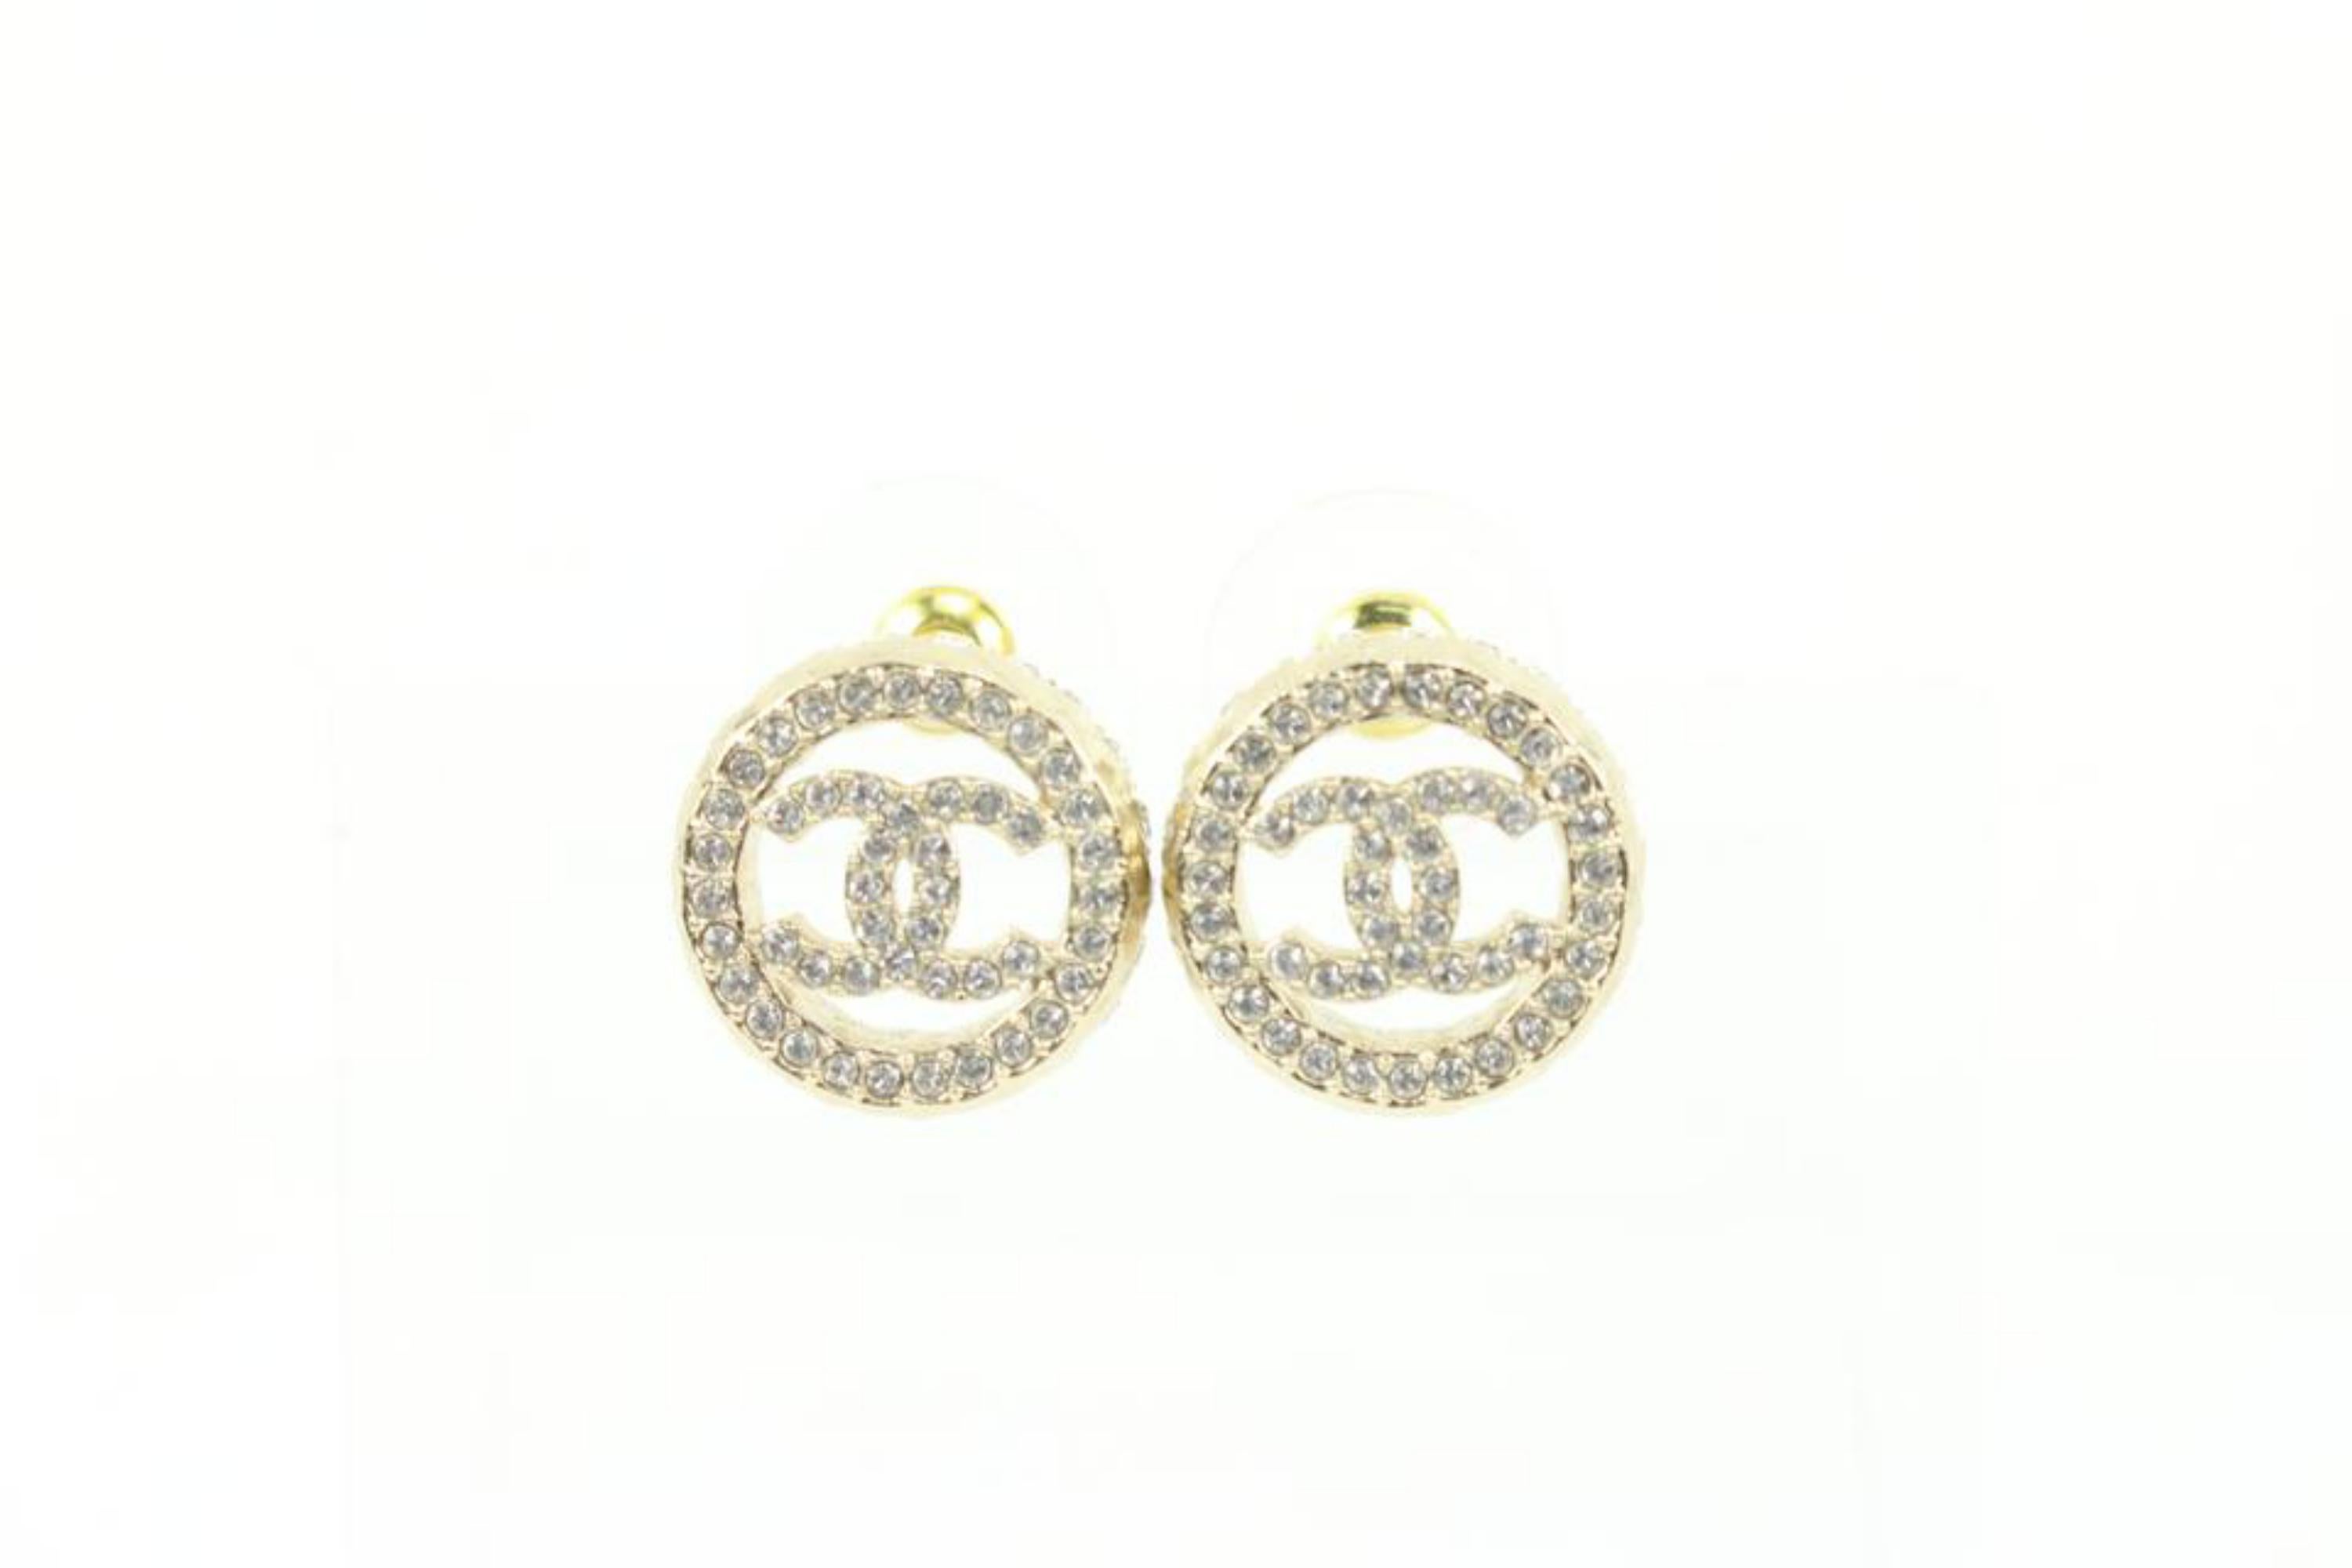 Chanel 22S Gold x Crystal Round CC Earrings Pierce 13ck311s
Date Code/Serial Number: B22 S
Made In: Italy
Measurements: Length:  .5